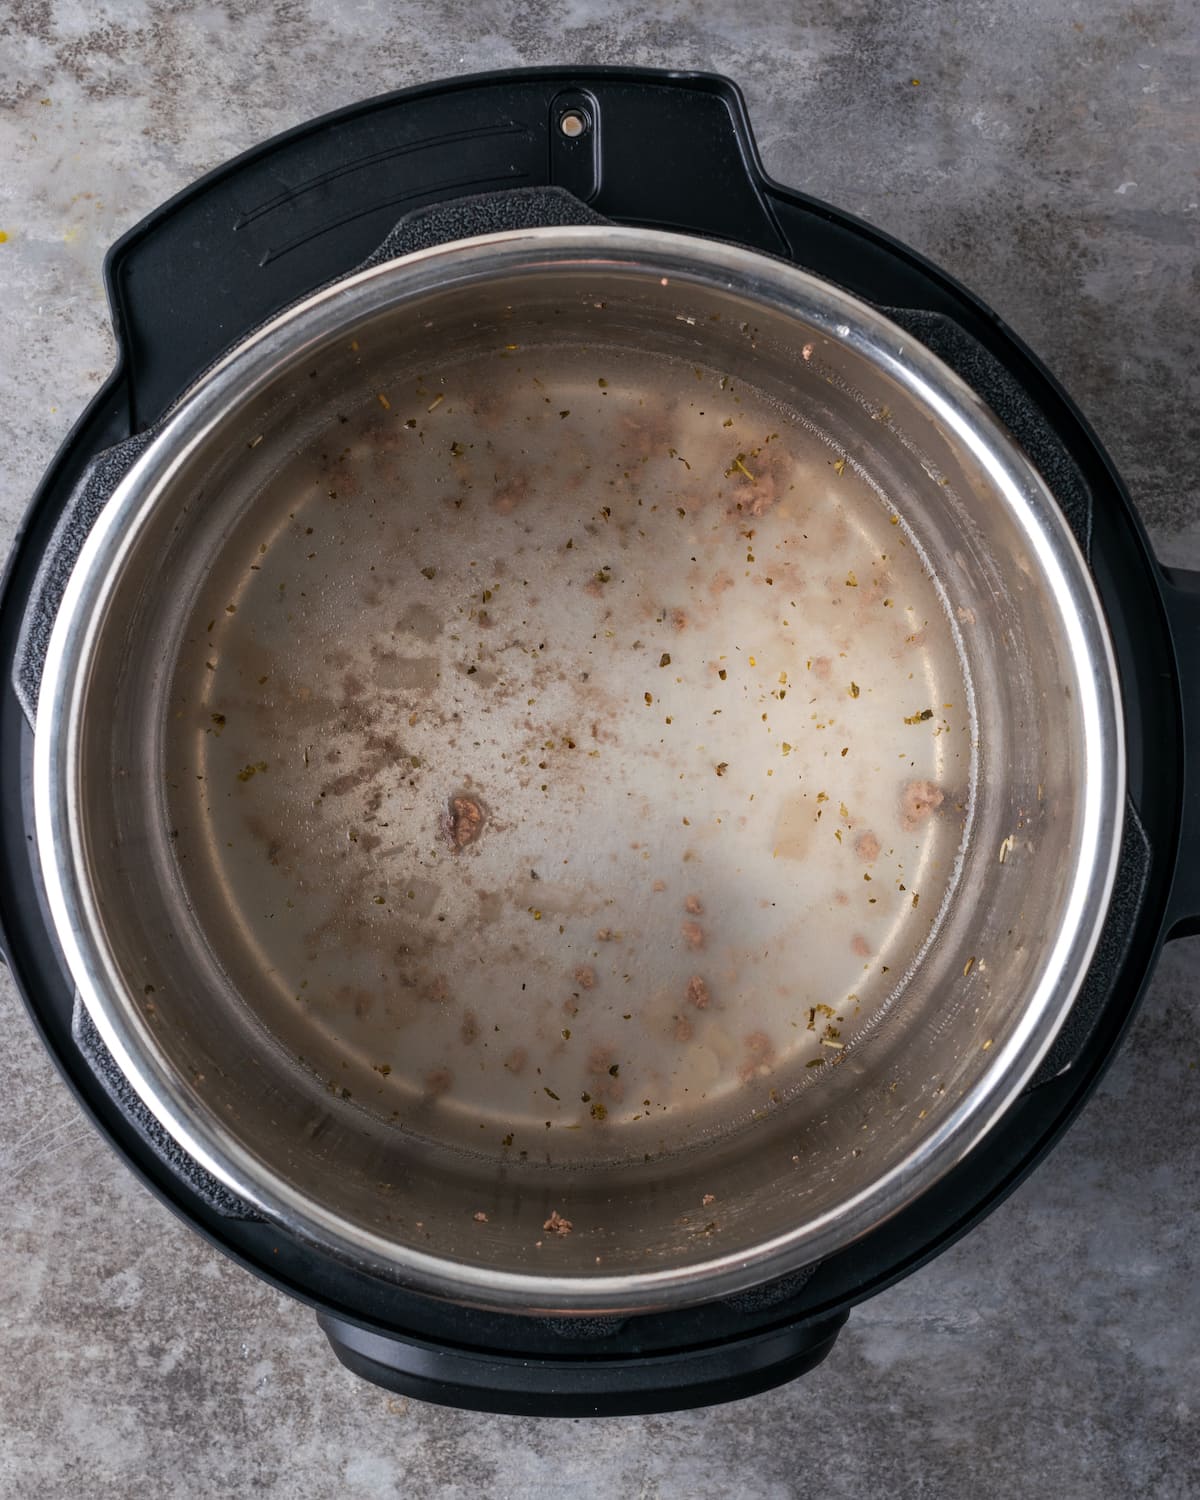 Overhead view of water inside the instant pot.